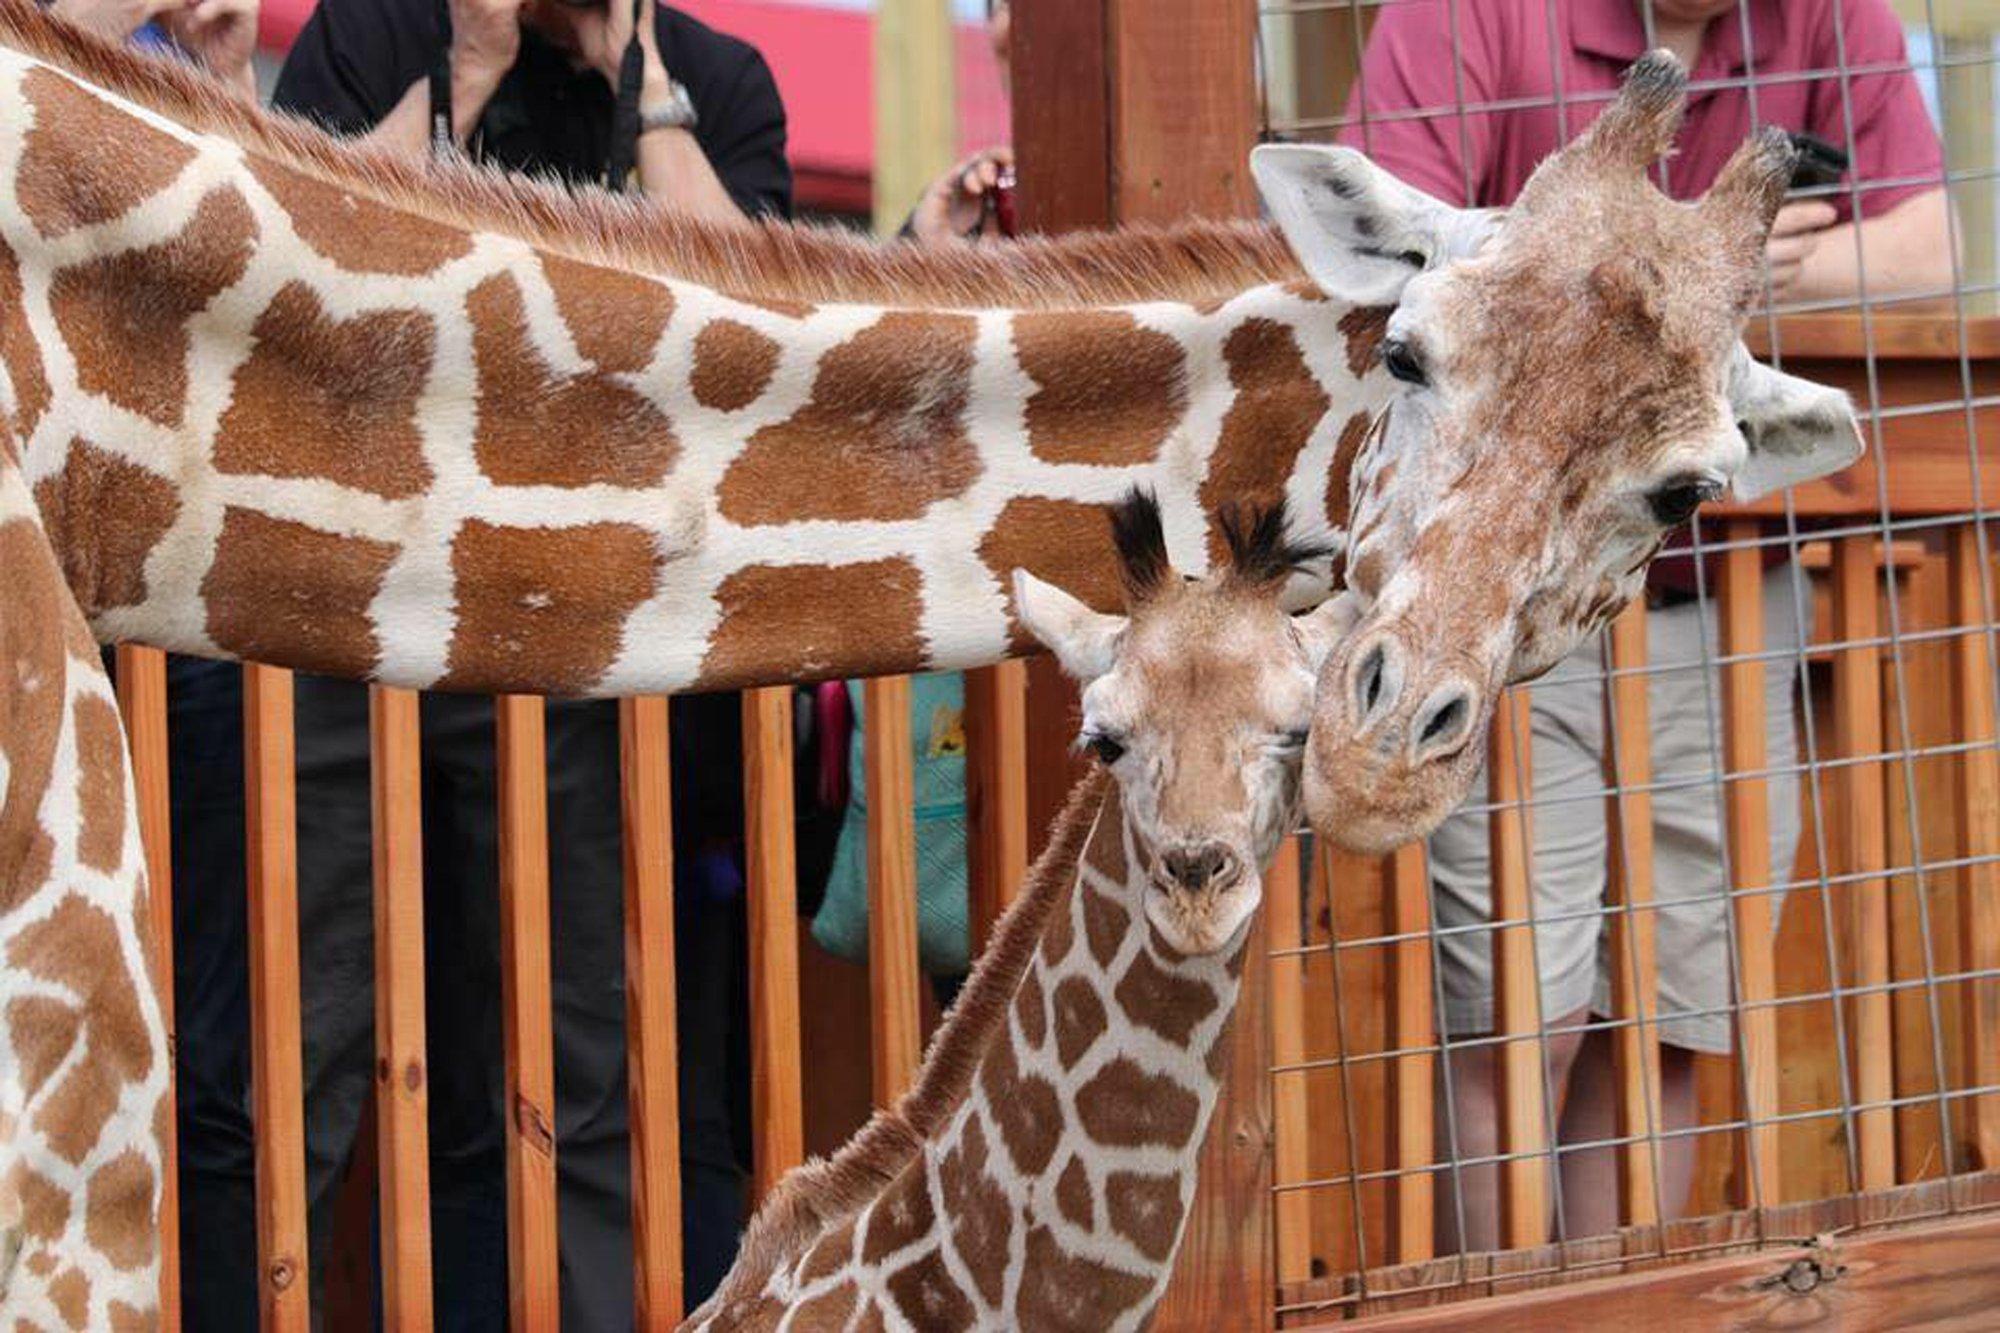 Oh, baby: April the Giraffe is about to give birth again